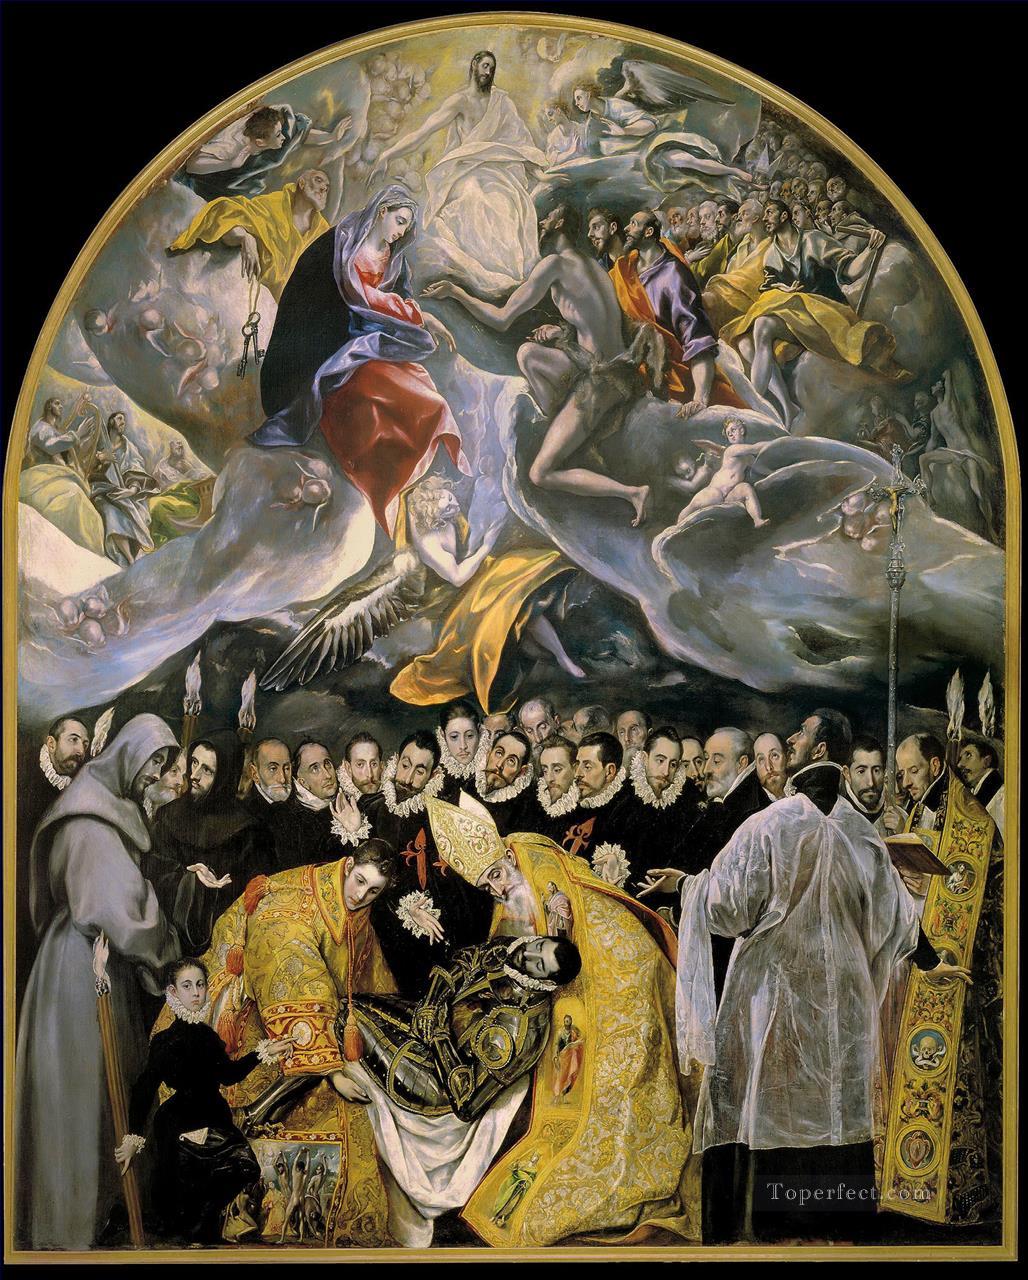 El Greco: The Burial of the Count of Orgaz